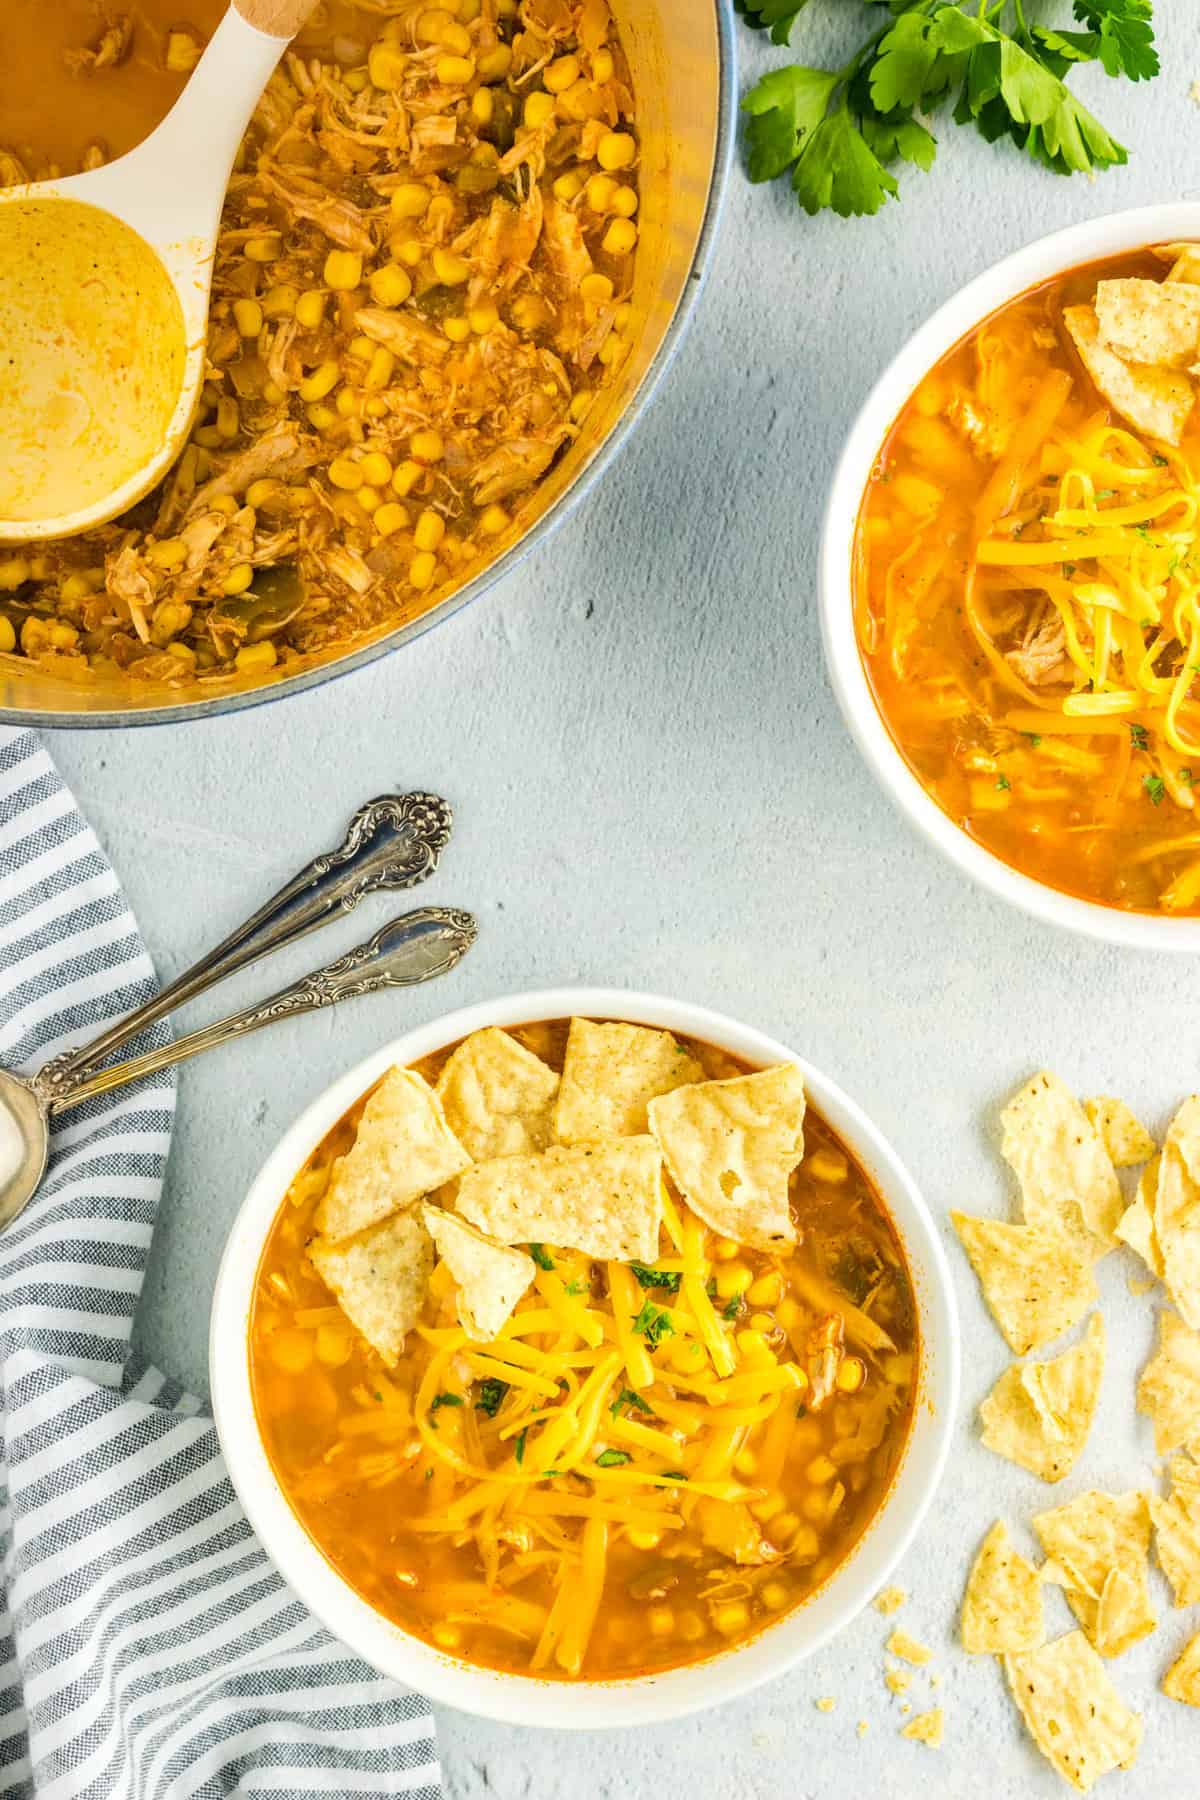 Easy Chicken Tortilla Soup Ready to Enjoy with Tortilla Chips & Cheese